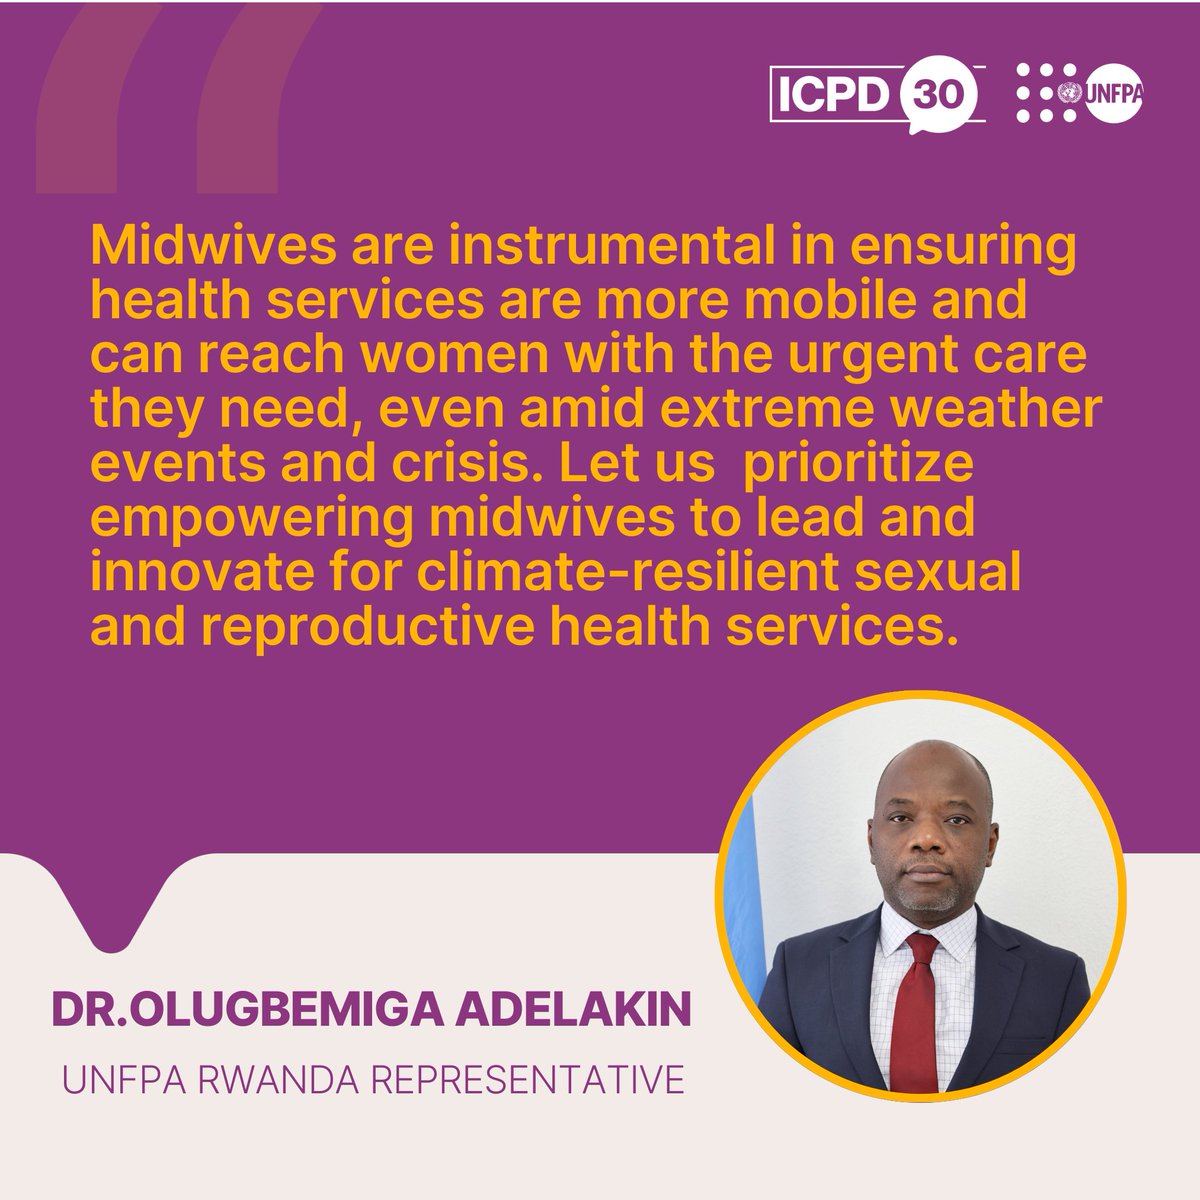 It's time to advocate for policies and investment strategies that support midwives! Let's ensure they have the regulations and resources they need to thrive. #SupportMidwives #DayOfTheMidwife unf.pa/44tuLmQ.